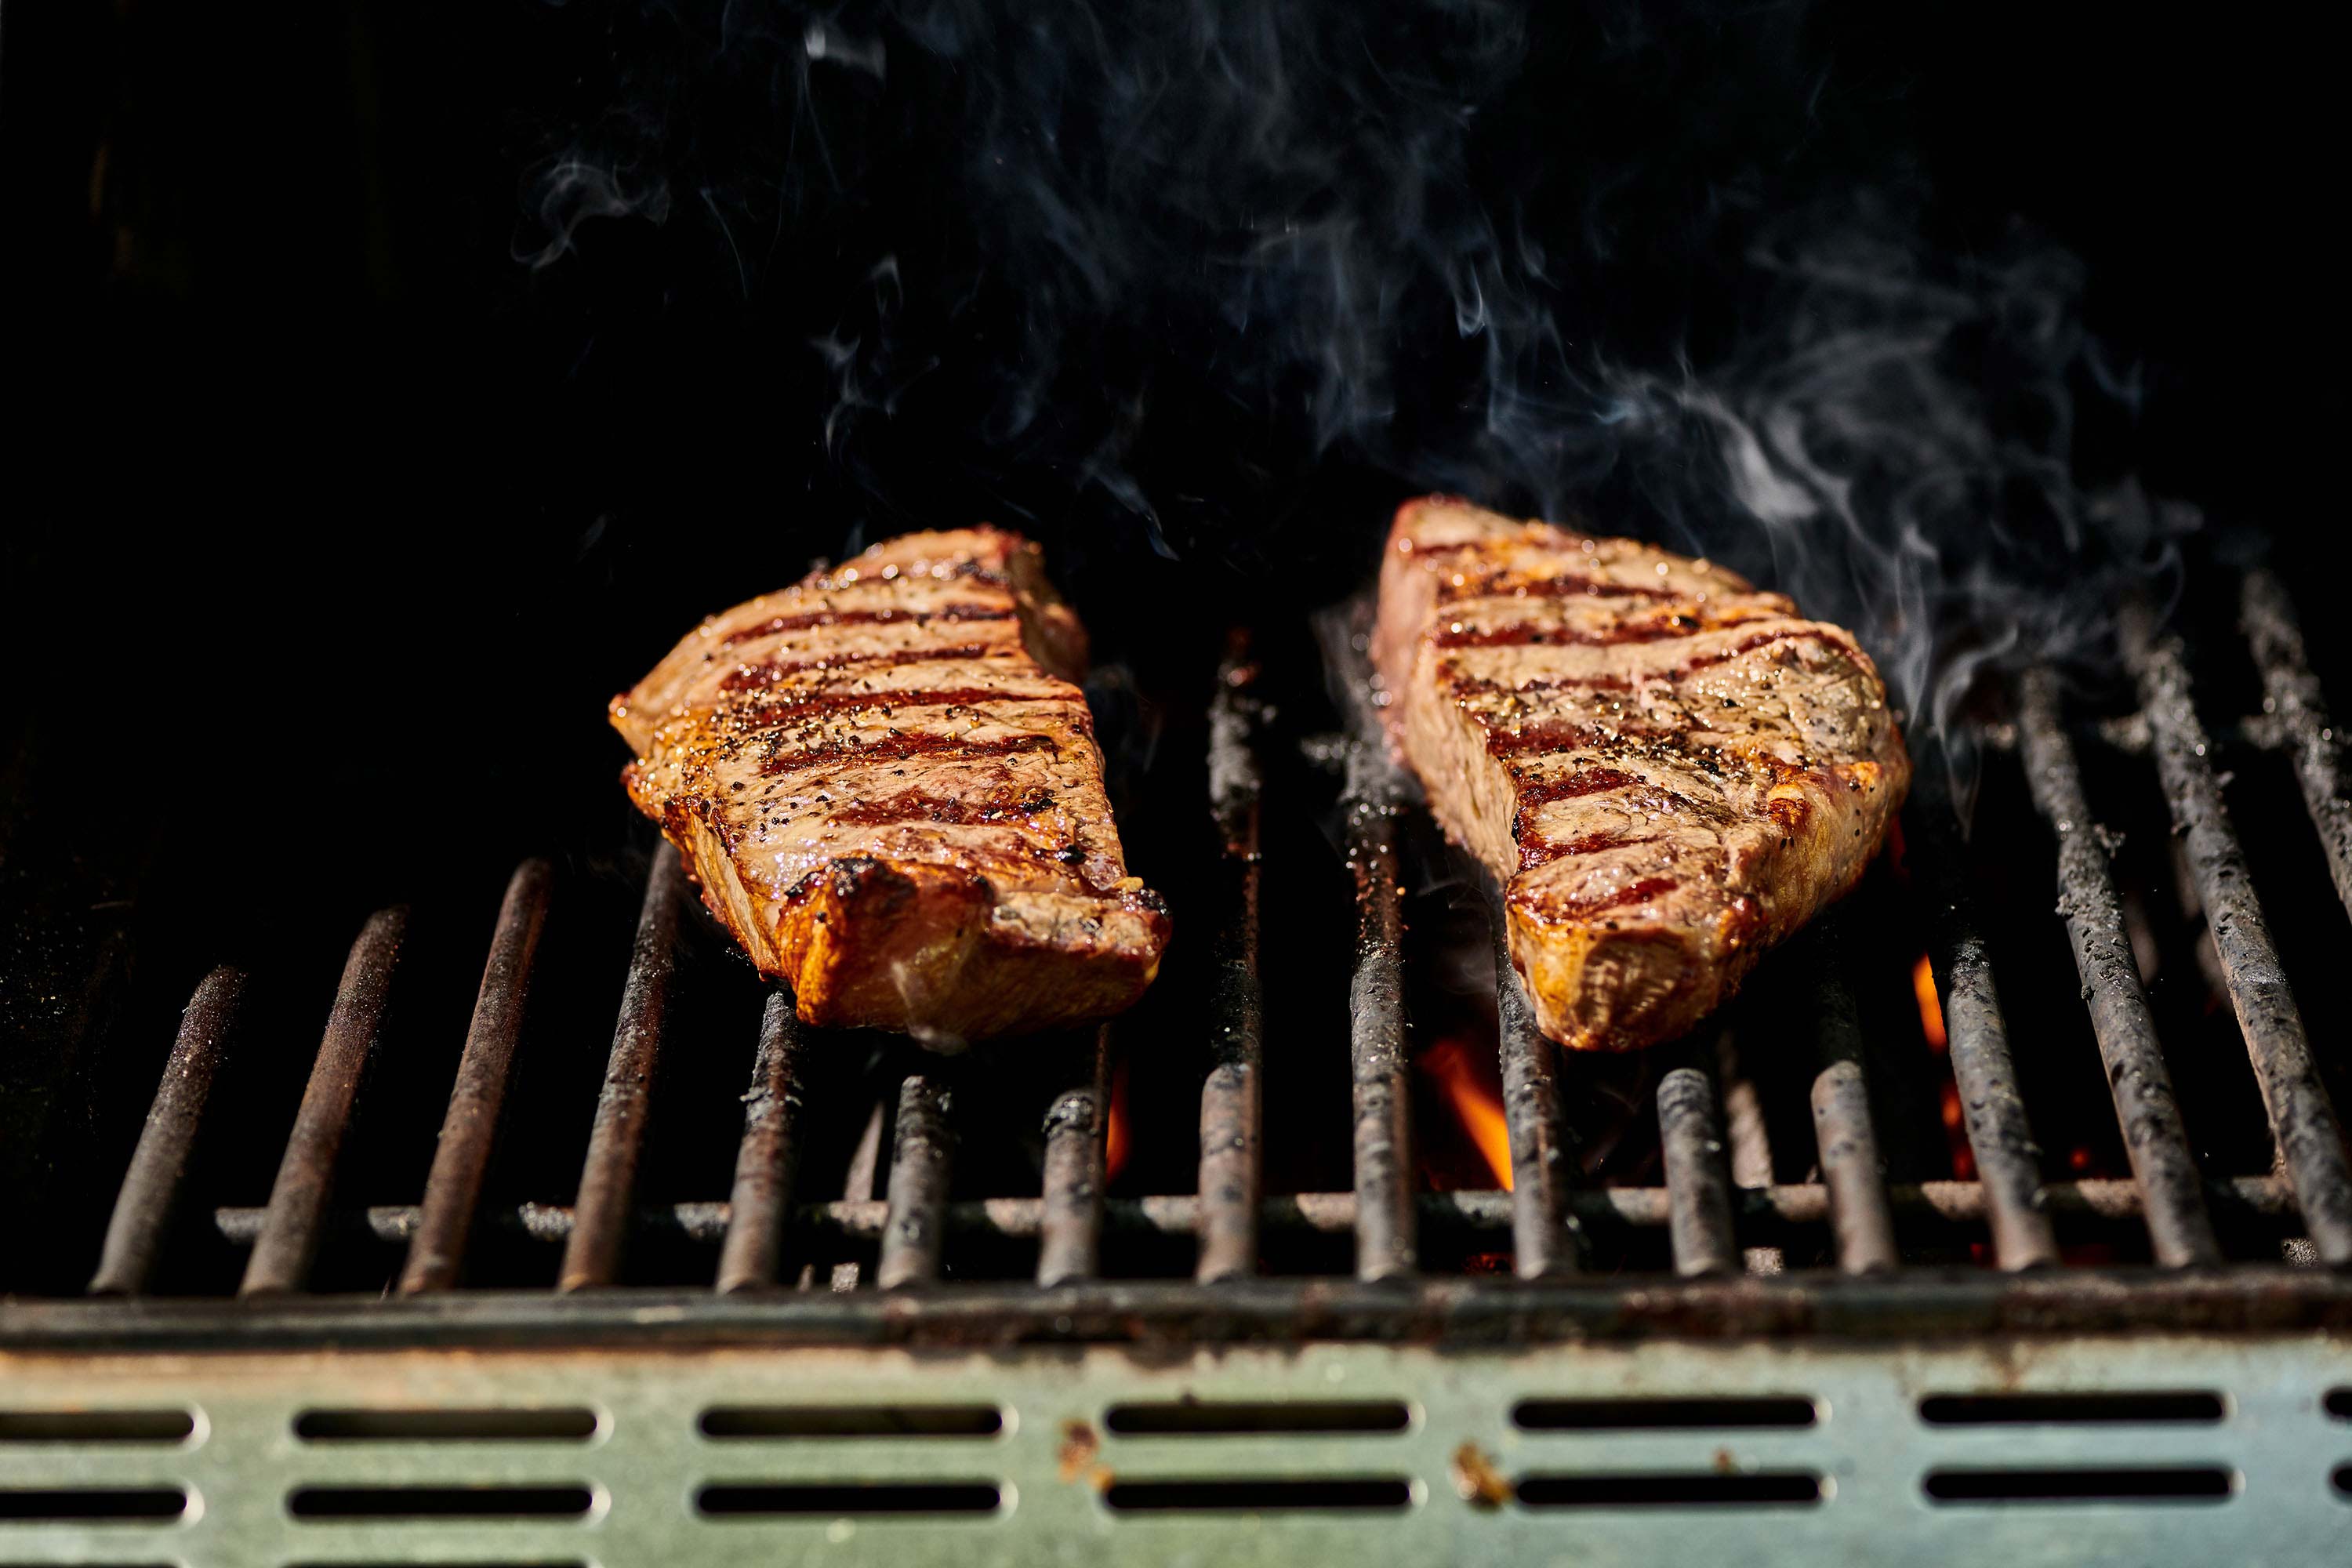 How To Grill Strip Steak On A Gas Grill • Food Folks and Fun